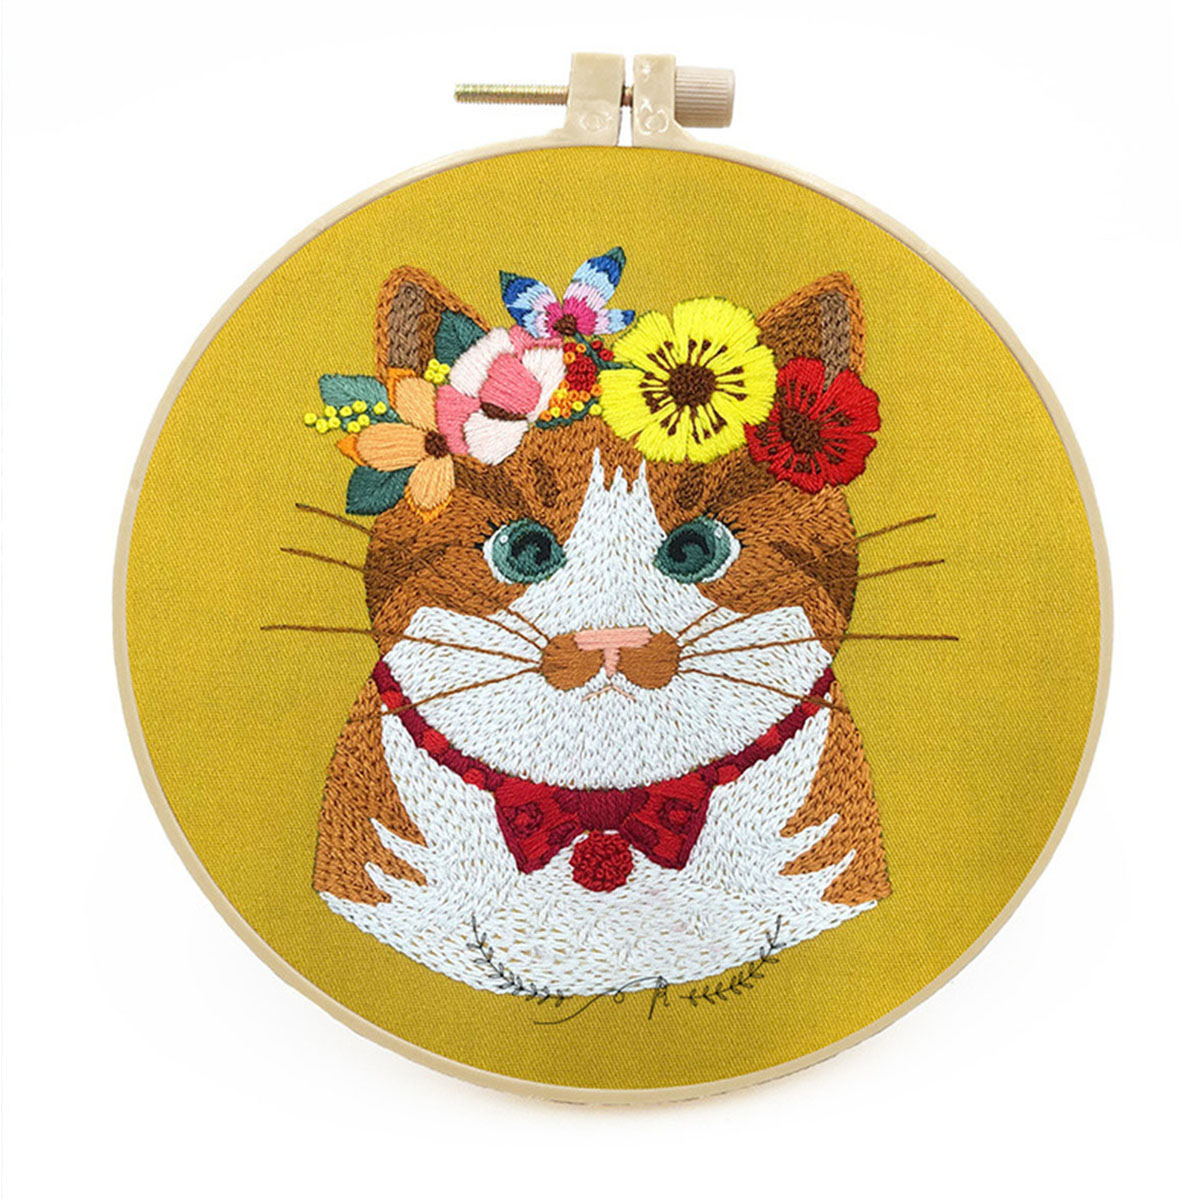 Embroidery starter kit for Adult Beginner - Cute Cat Floral Pattern